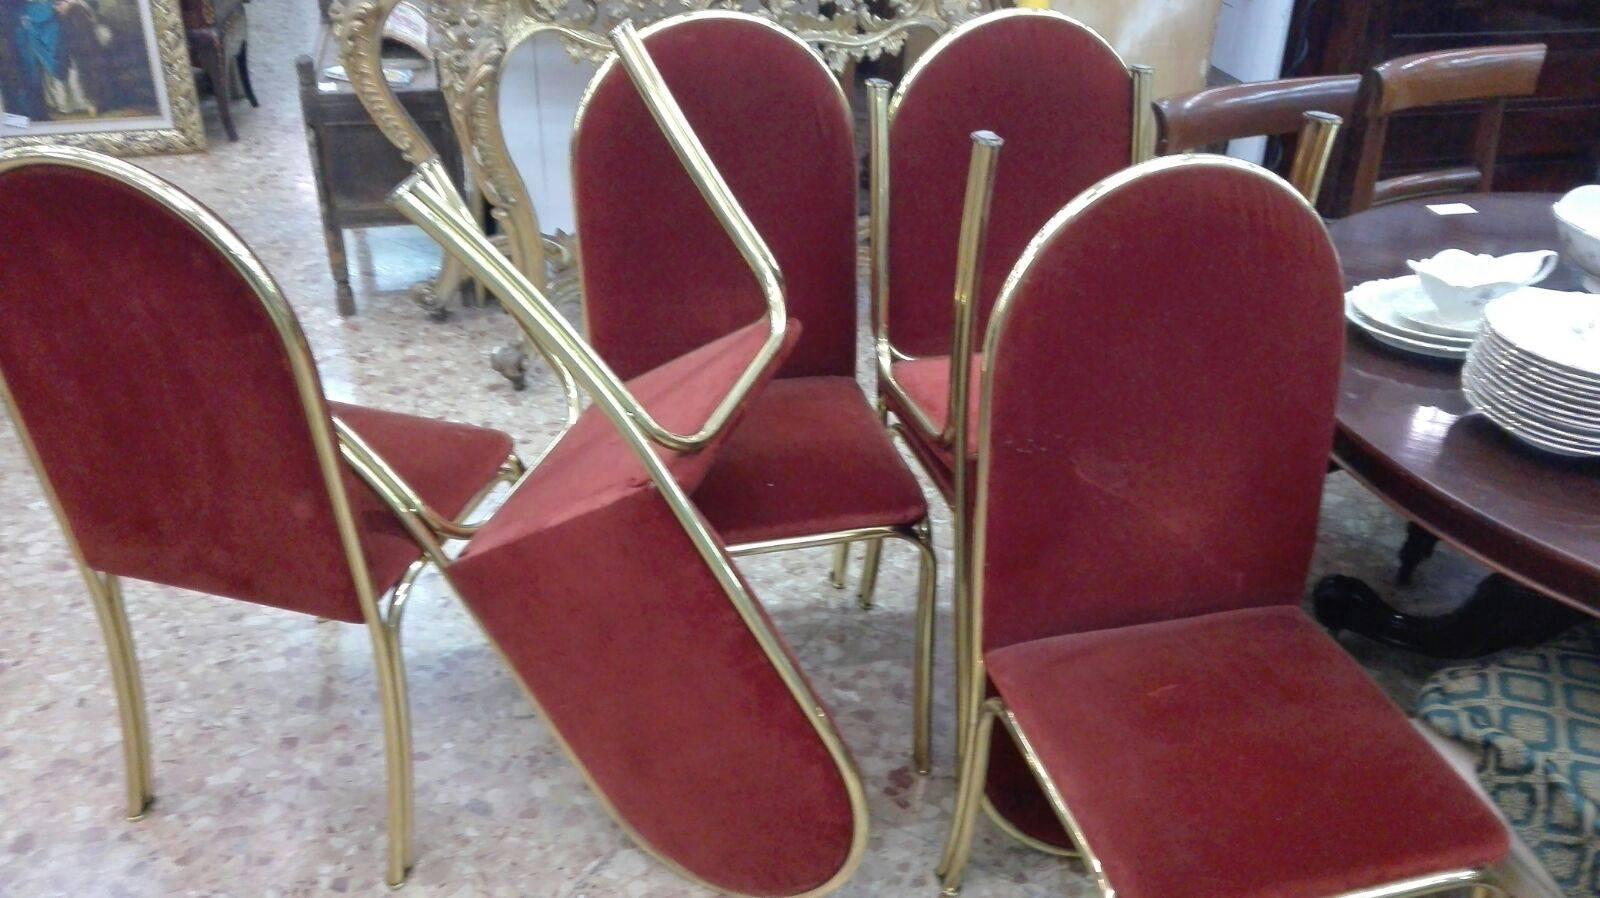 Very exclusive set of six chairs Romeo Rega, Italy, 1970 in brass-plated metal structure, seat and backrest padded and lined in red velvet fabric. Very good condition.